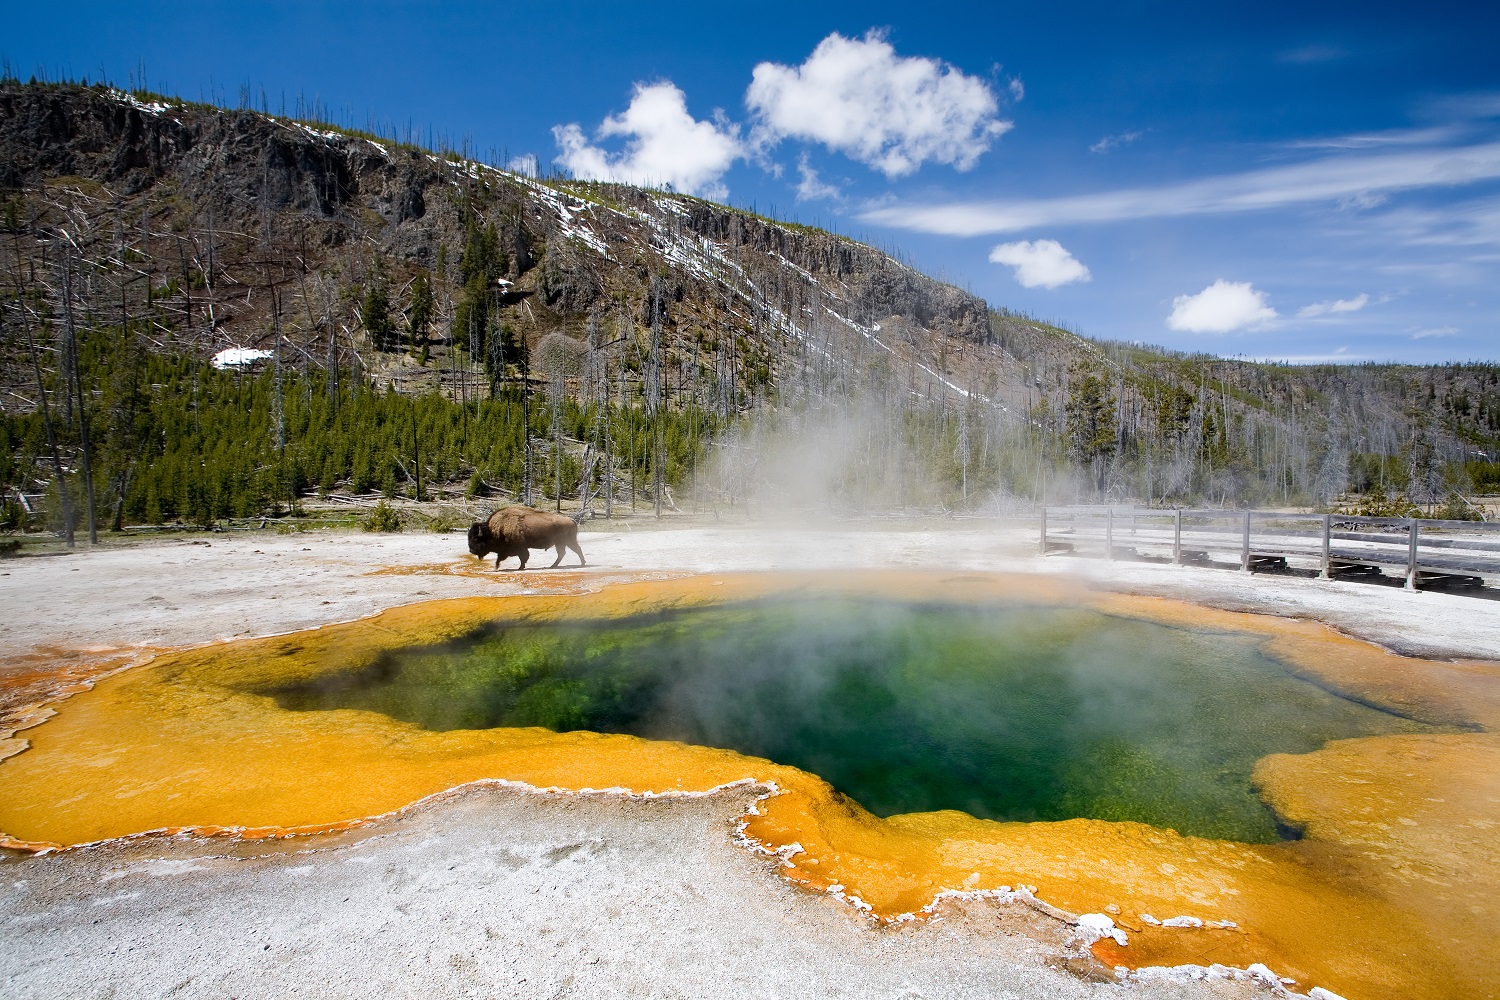 Highlights of your tour will include Yellowstone Lake, Old Faithful, Mammot...